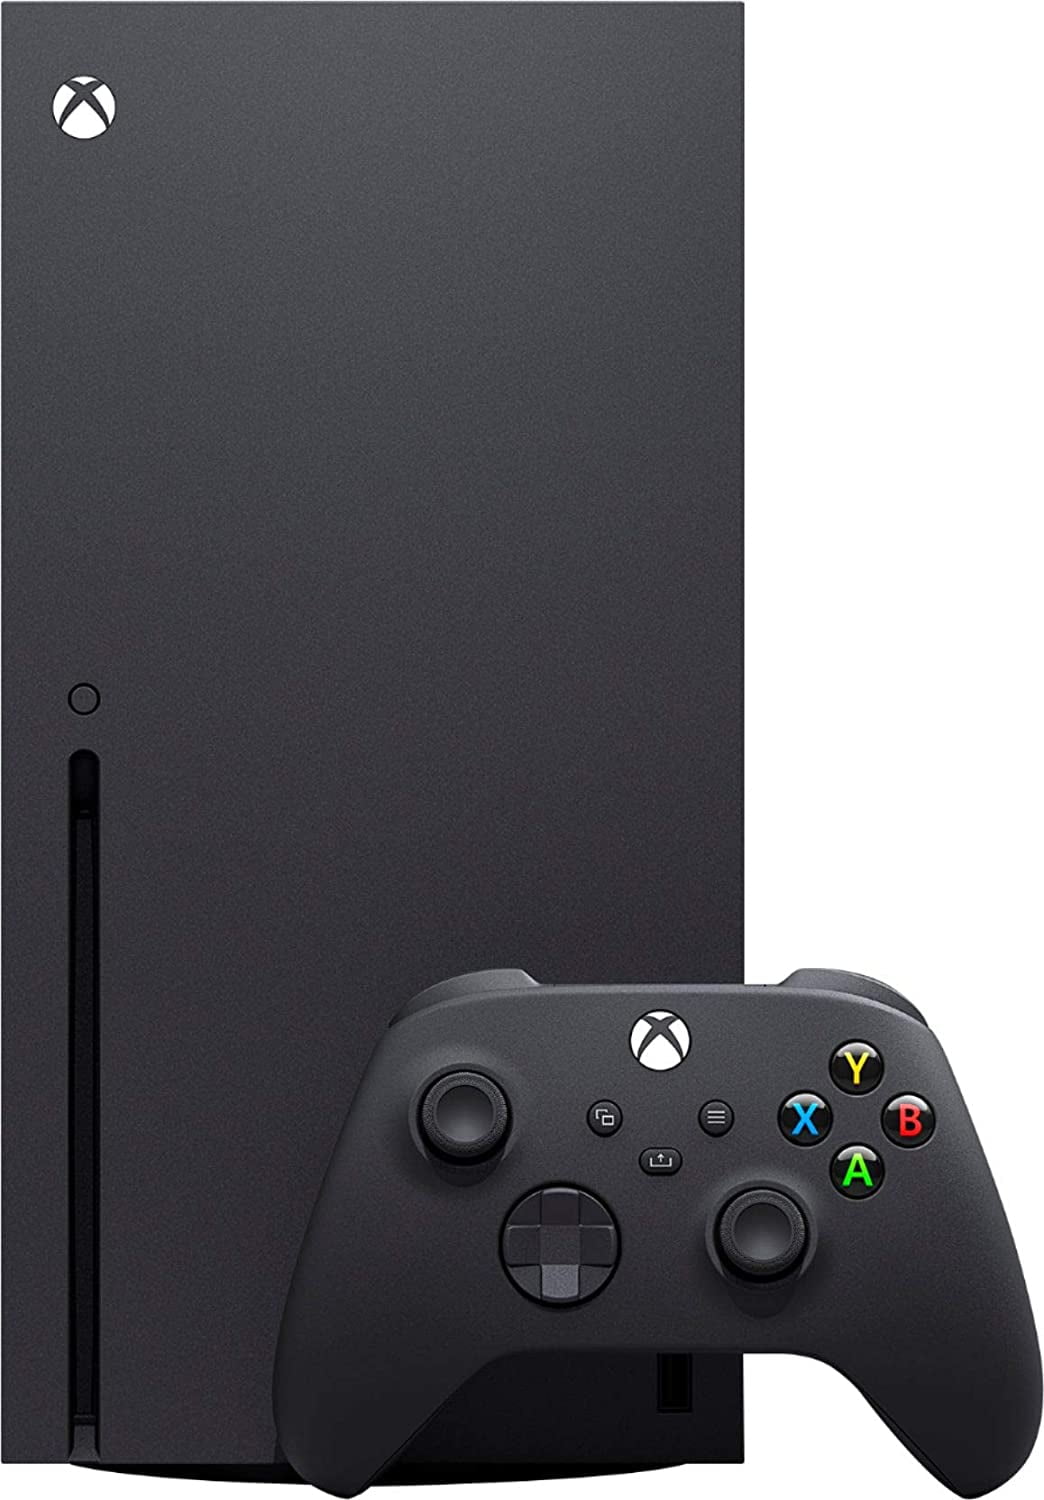 Microsoft Xbox Series X 1TB SSD Gaming Console with 1 Xbox Wireless  Controller - Black, 2160p Resolution, 8K HDR, Wi-Fi, w/Batteries and  Charger 